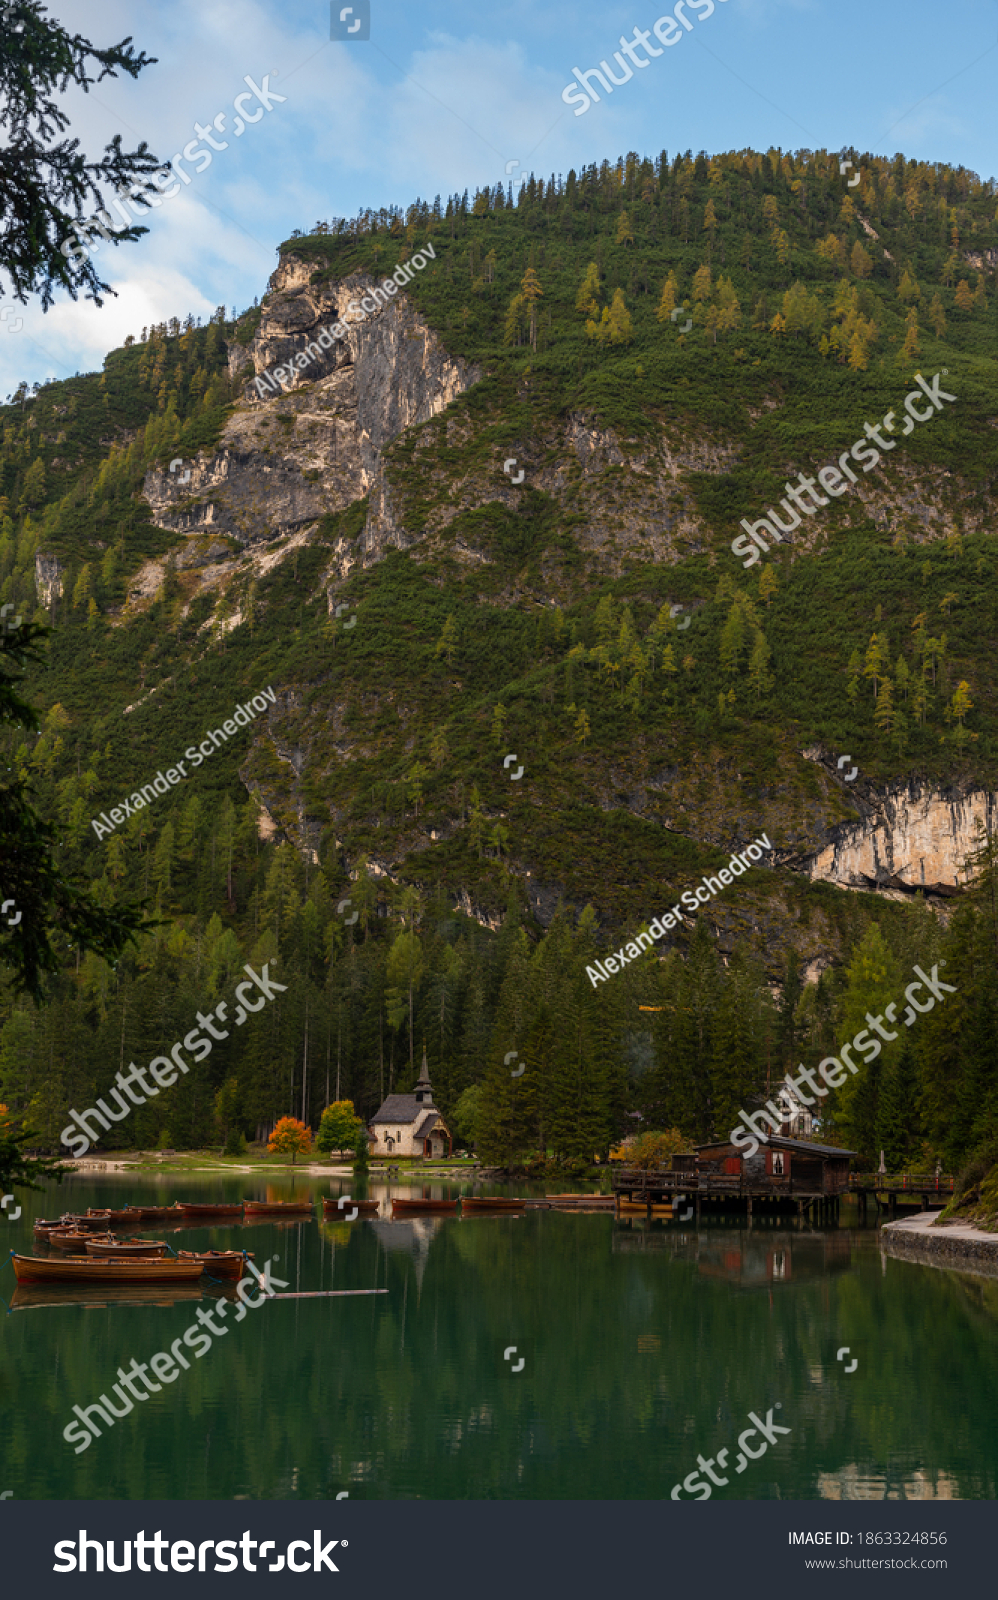 Little chapel and boatshouse at Lake Braies (Pragser Wildsee, Lago di Braies) with boats in foreground. Region of Trentino Alto Adige, Dolomites, Italy #1863324856